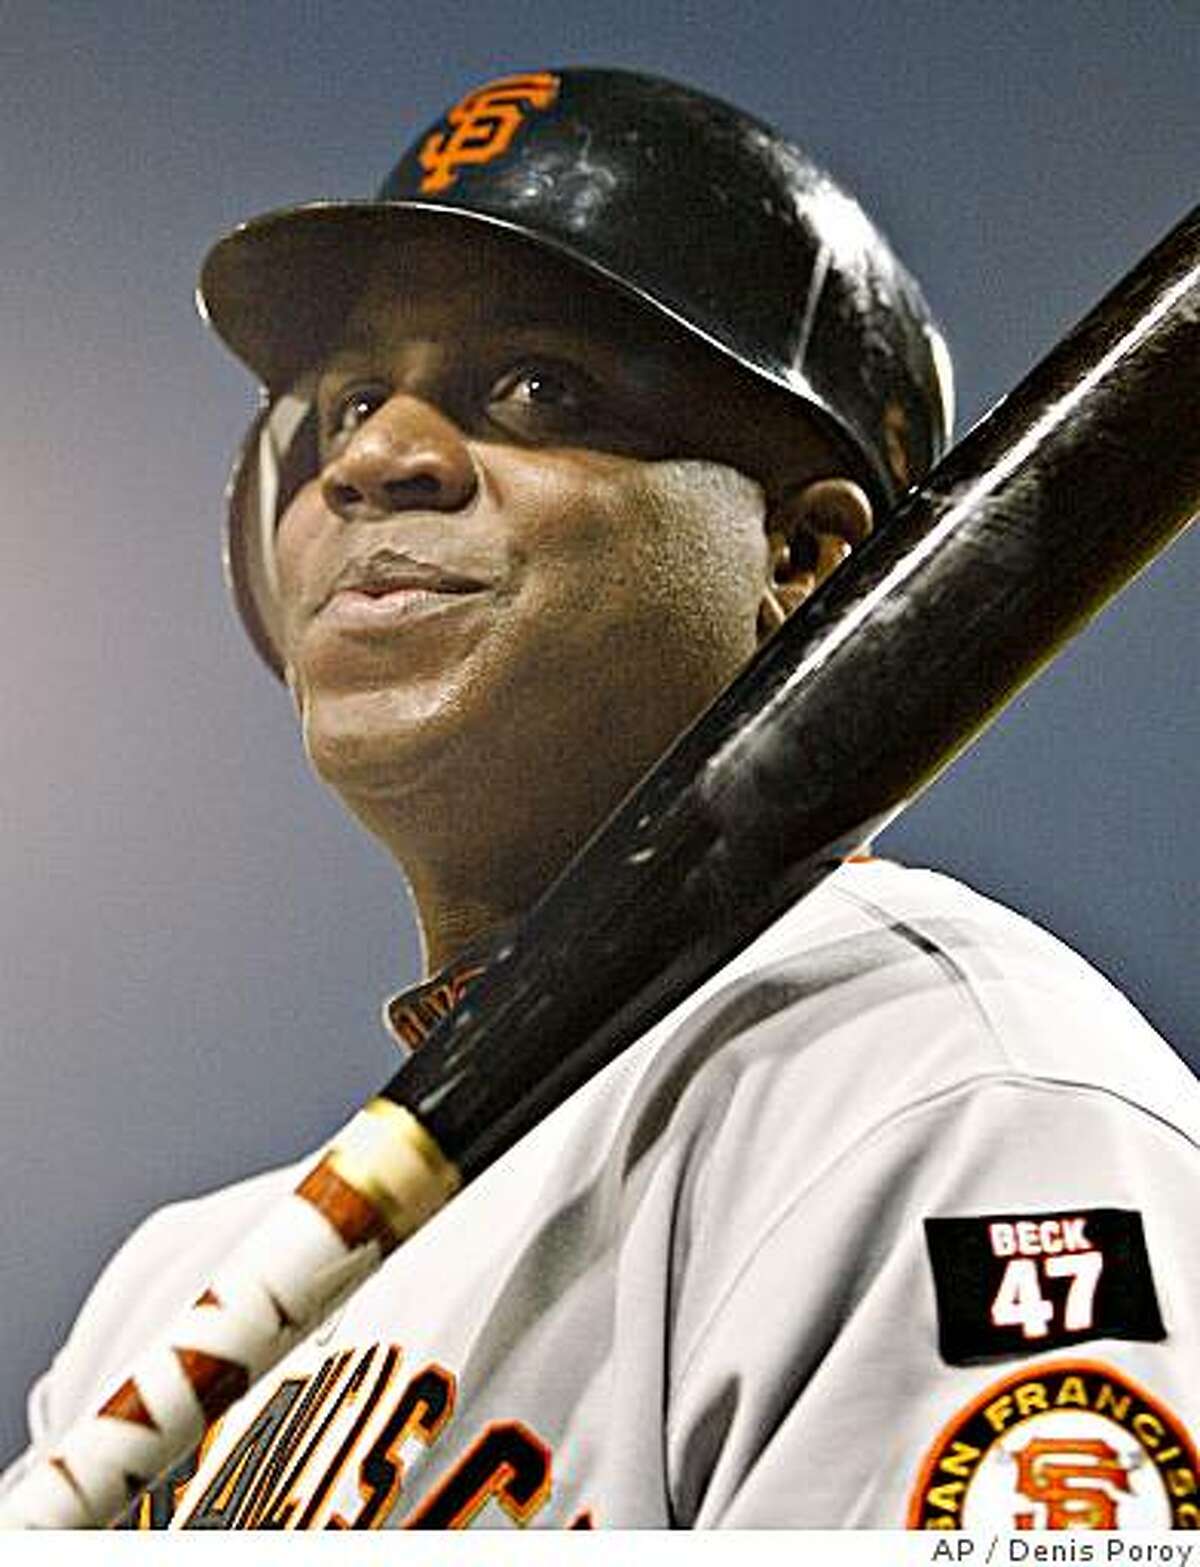 ** FILE ** San Francisco Giants' Barry Bonds waits before his at-bat in the second inning of a baseball game against the San Diego Padres, in this Sept. 15, 2007 file photo, in San Diego. A typo in court papers regarding Bonds filed late Thursday, Feb. 14, 2008, by federal prosecutors touched off a brief tempest over the mistaken belief that he failed a drug test in November 2001, one month after breaking the home run record. (AP Photo/Denis Poroy, File)